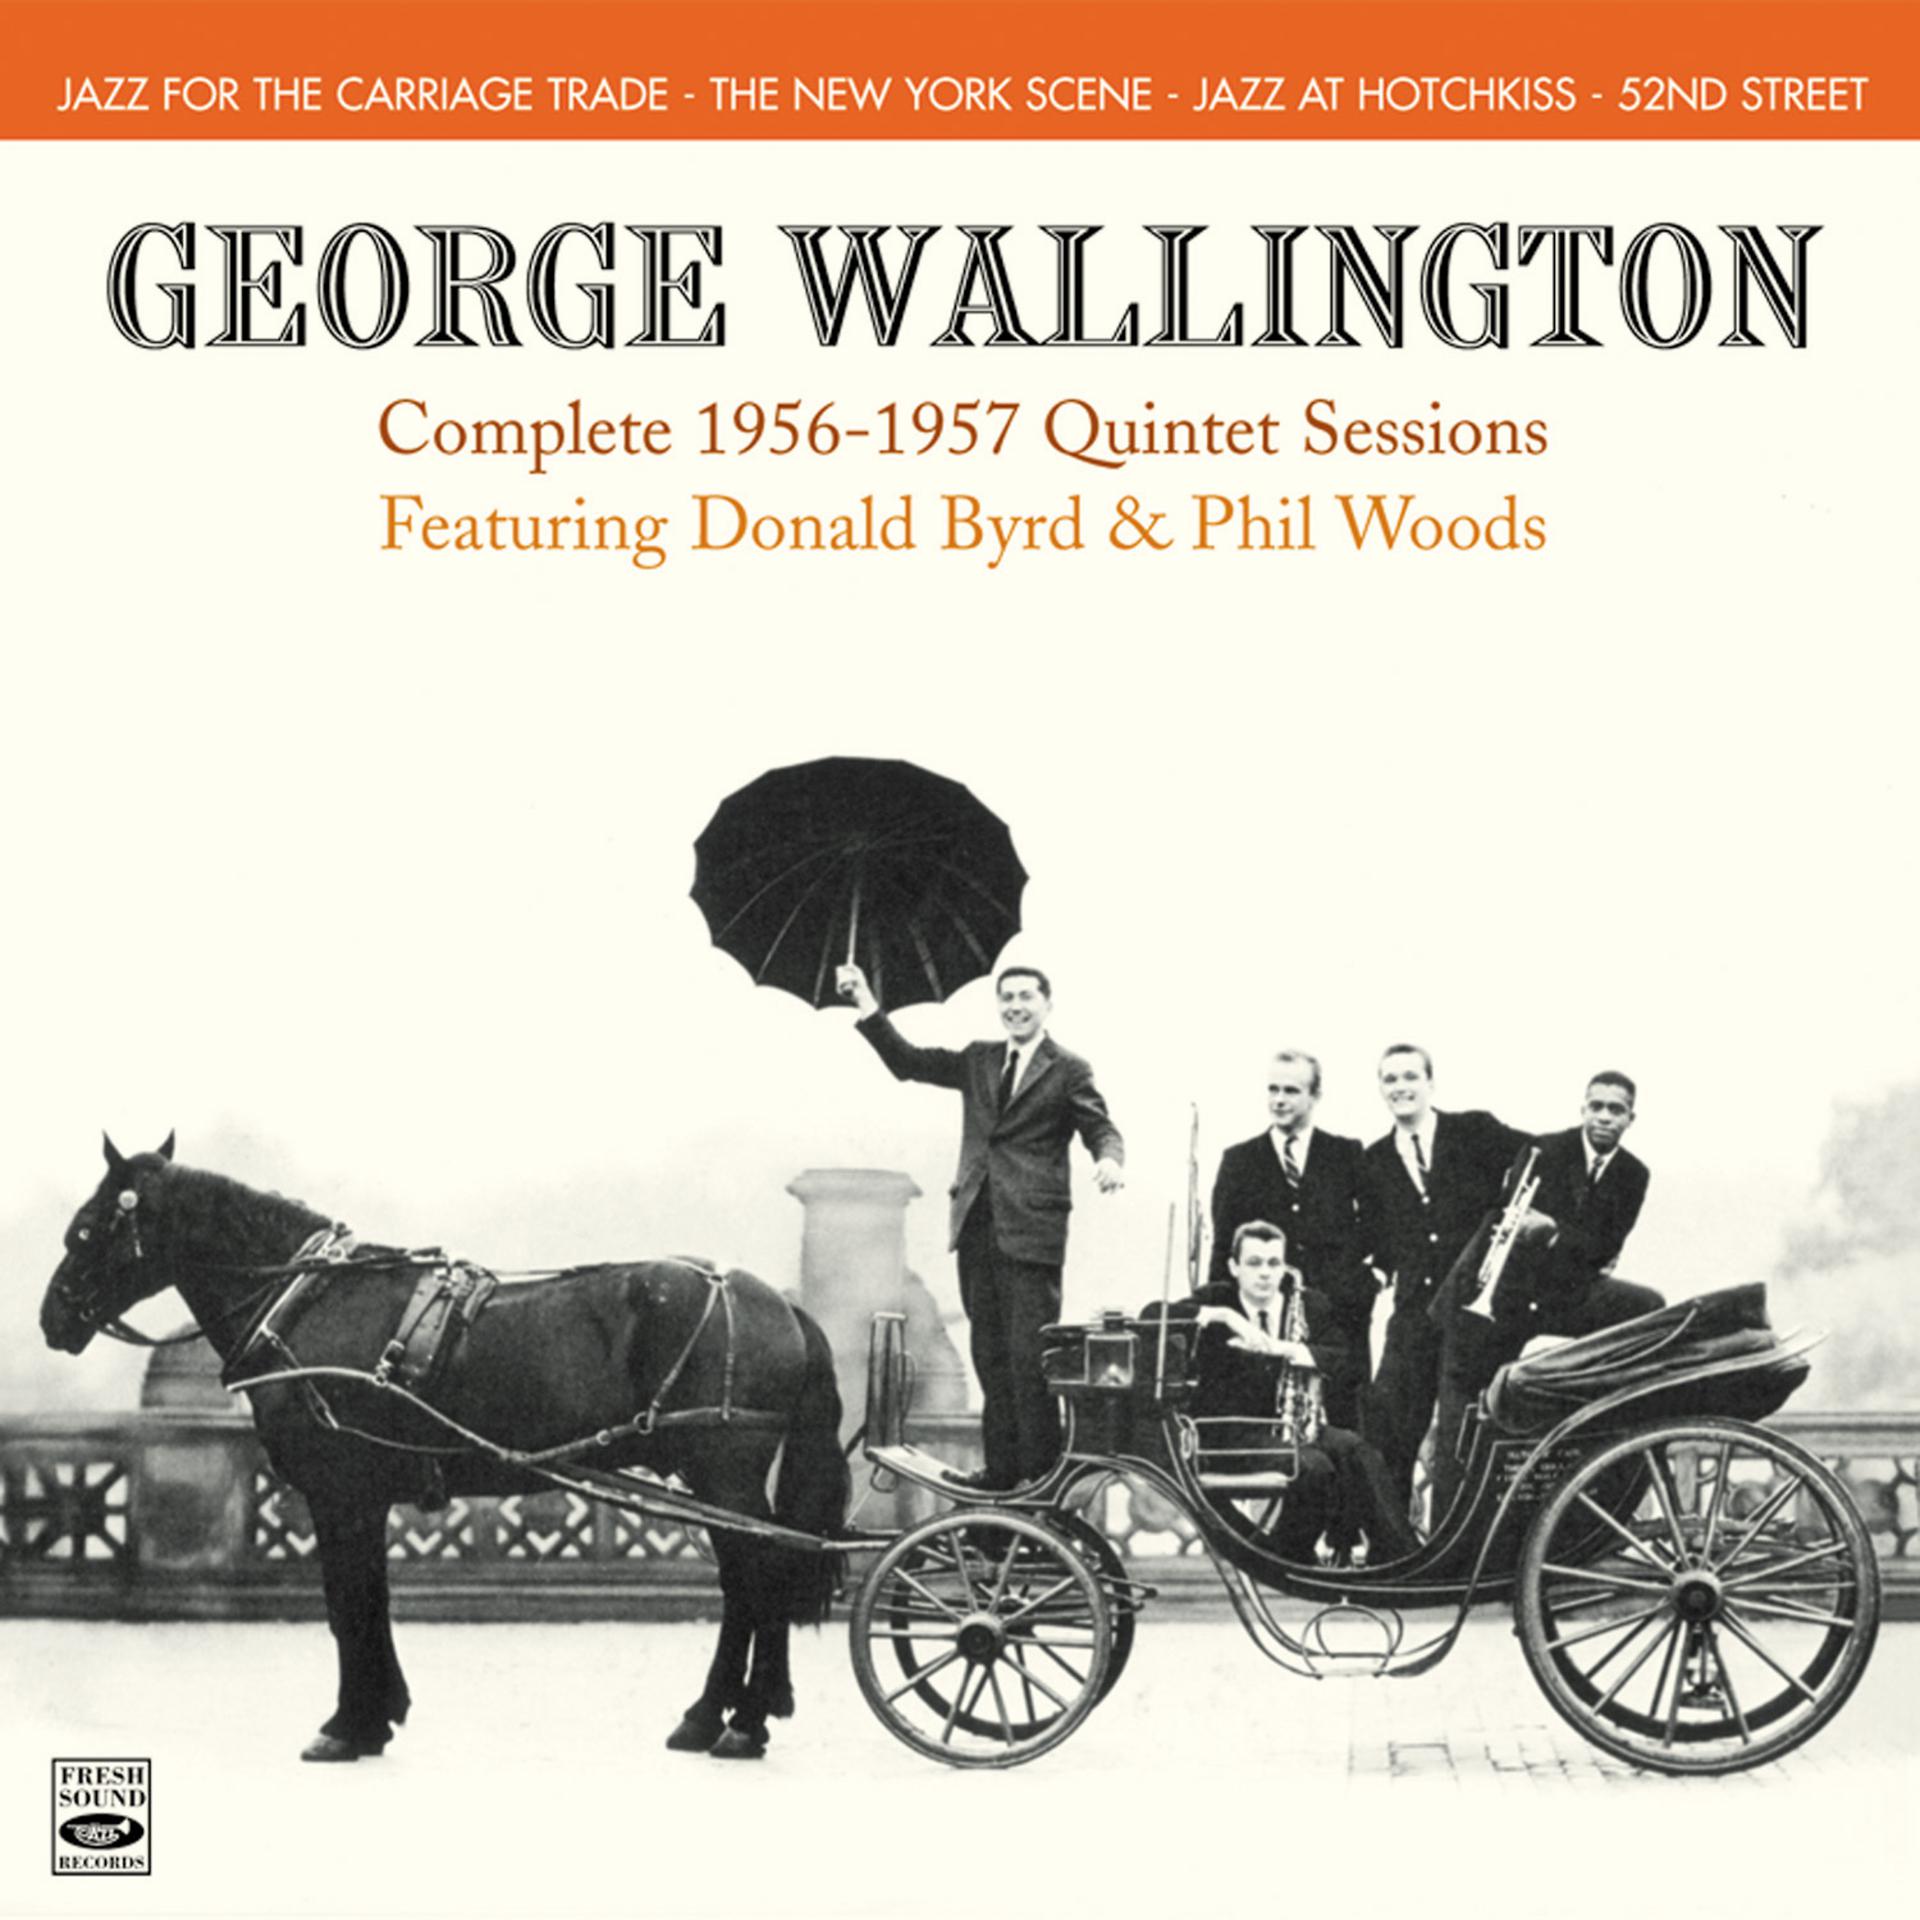 Постер альбома George Wallington. Complete 1956-1957 Quintet Sessions. Jazz for the Carriage Trade / The New York Scene / Jazz at Hotchkiss / 52nd Street